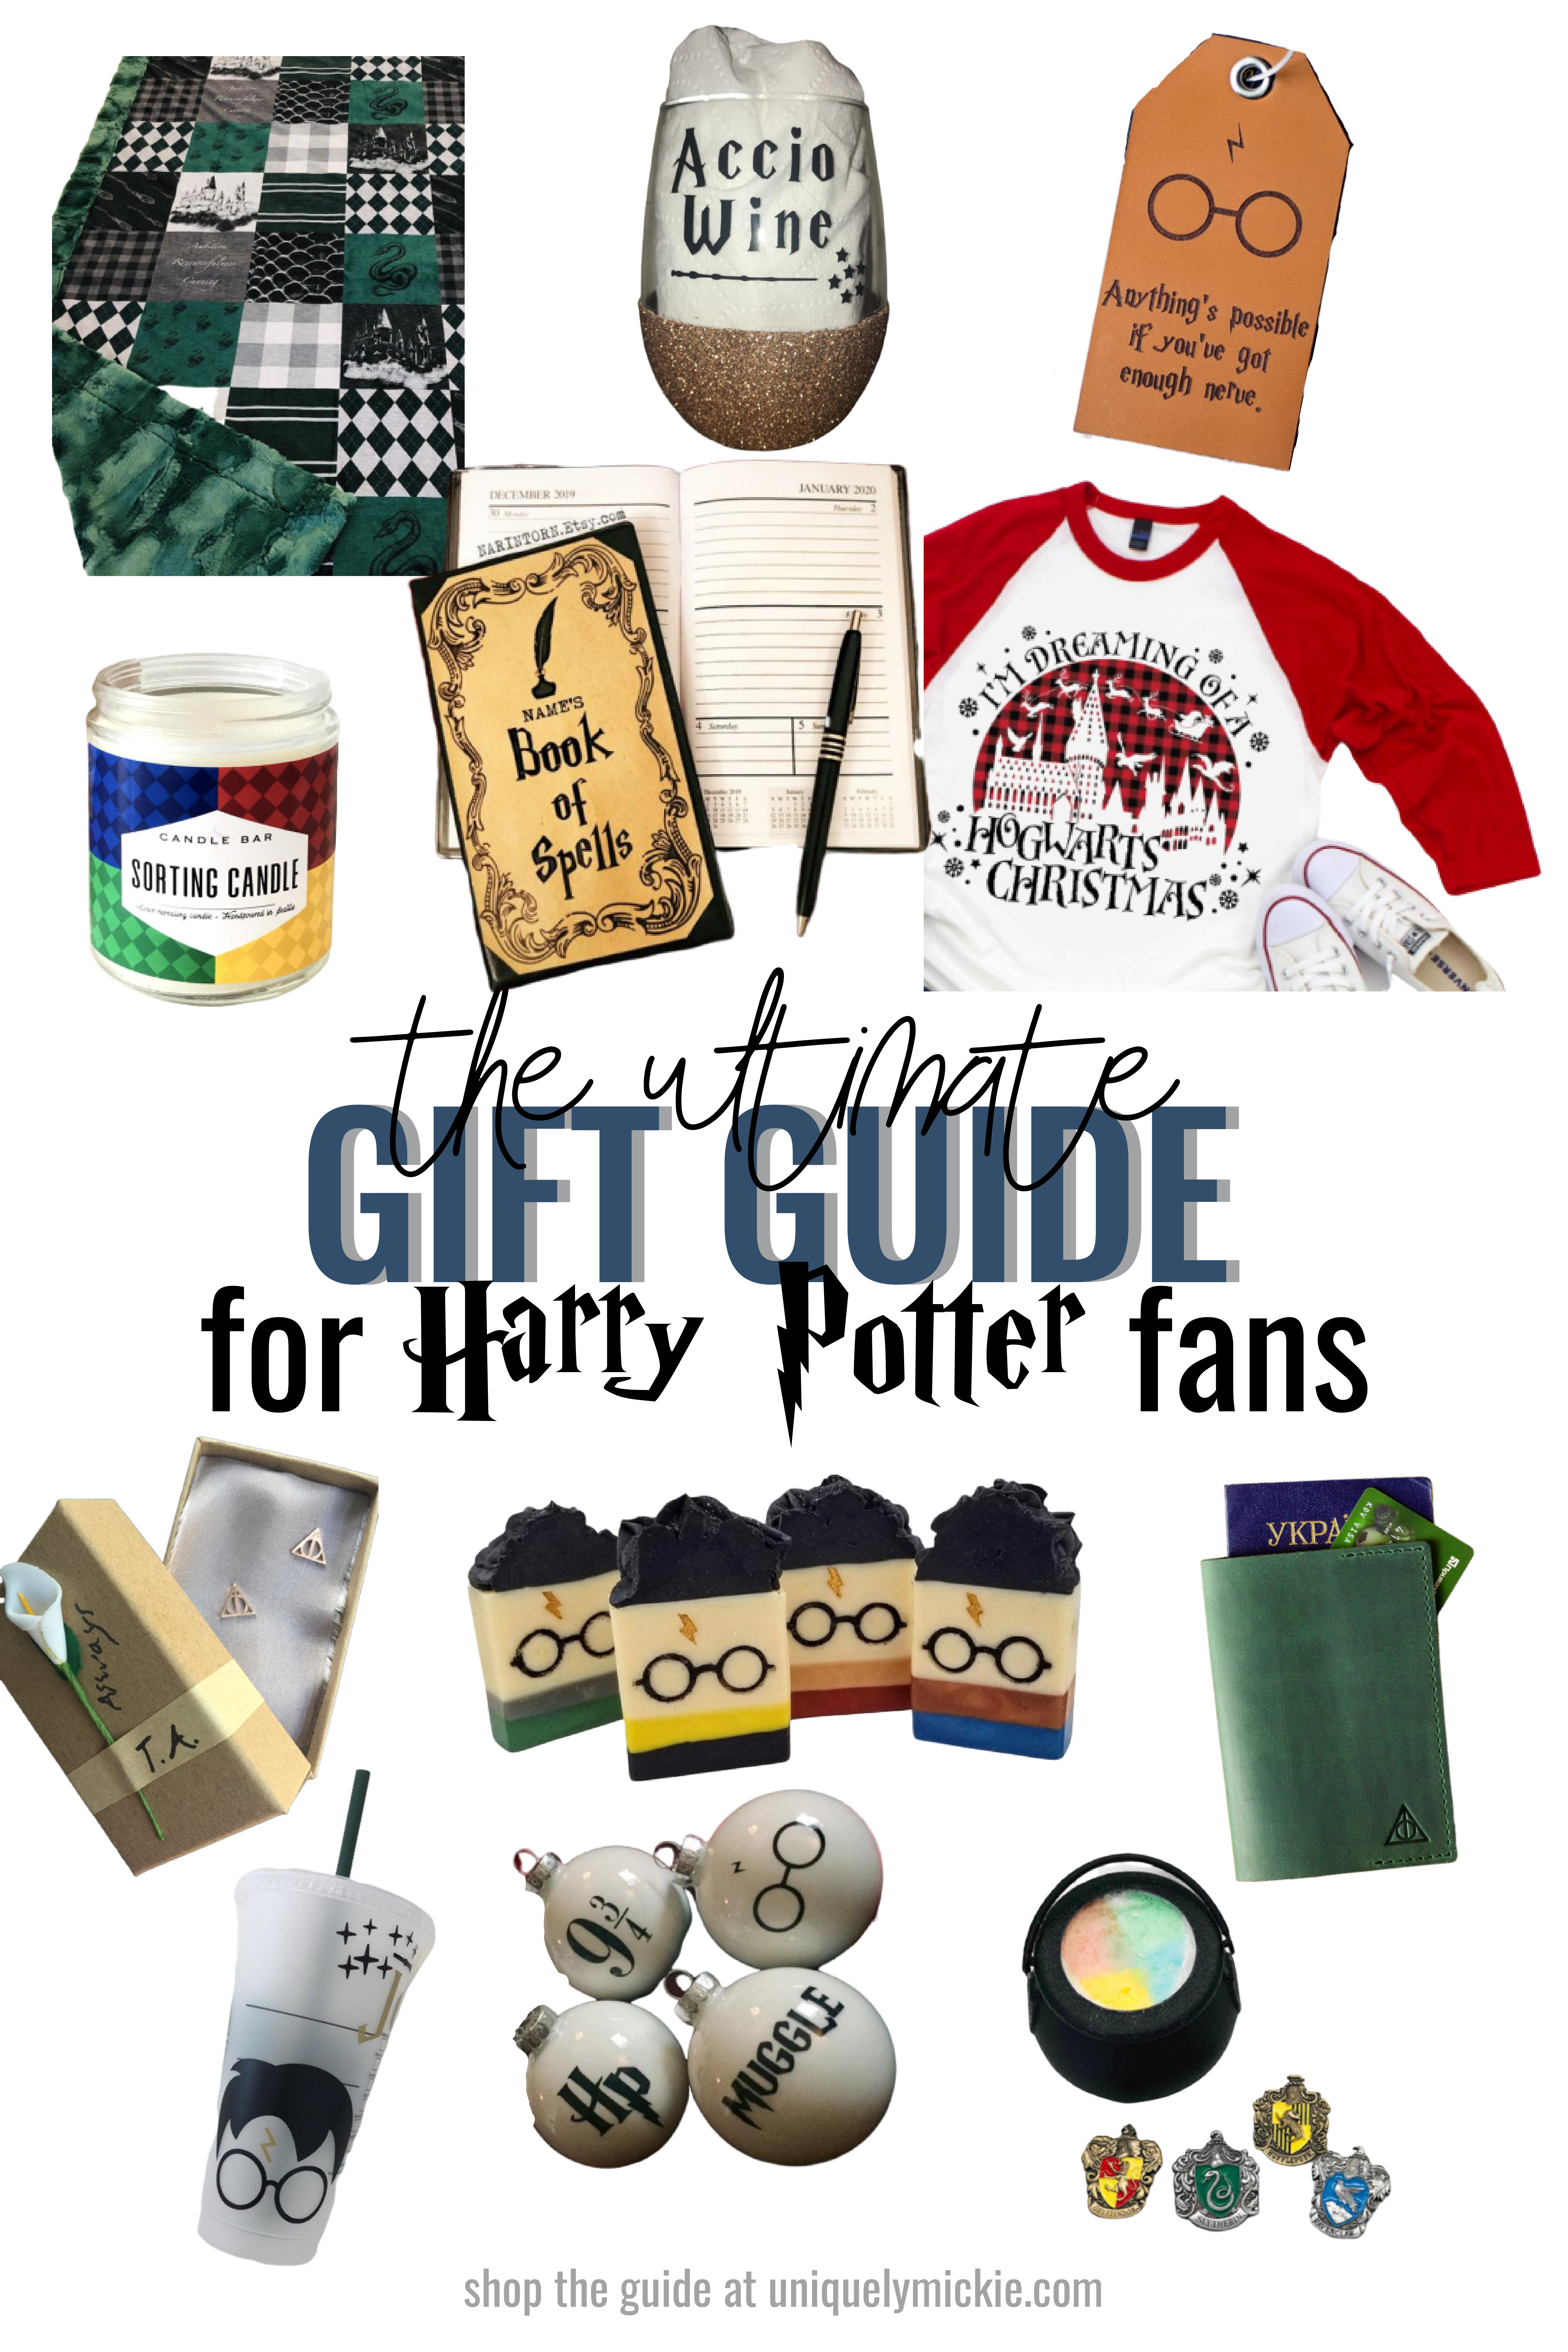 14 Harry Potter Inspired Etsy Finds That'll Make Perfect Gifts | Uniquely  Mickie